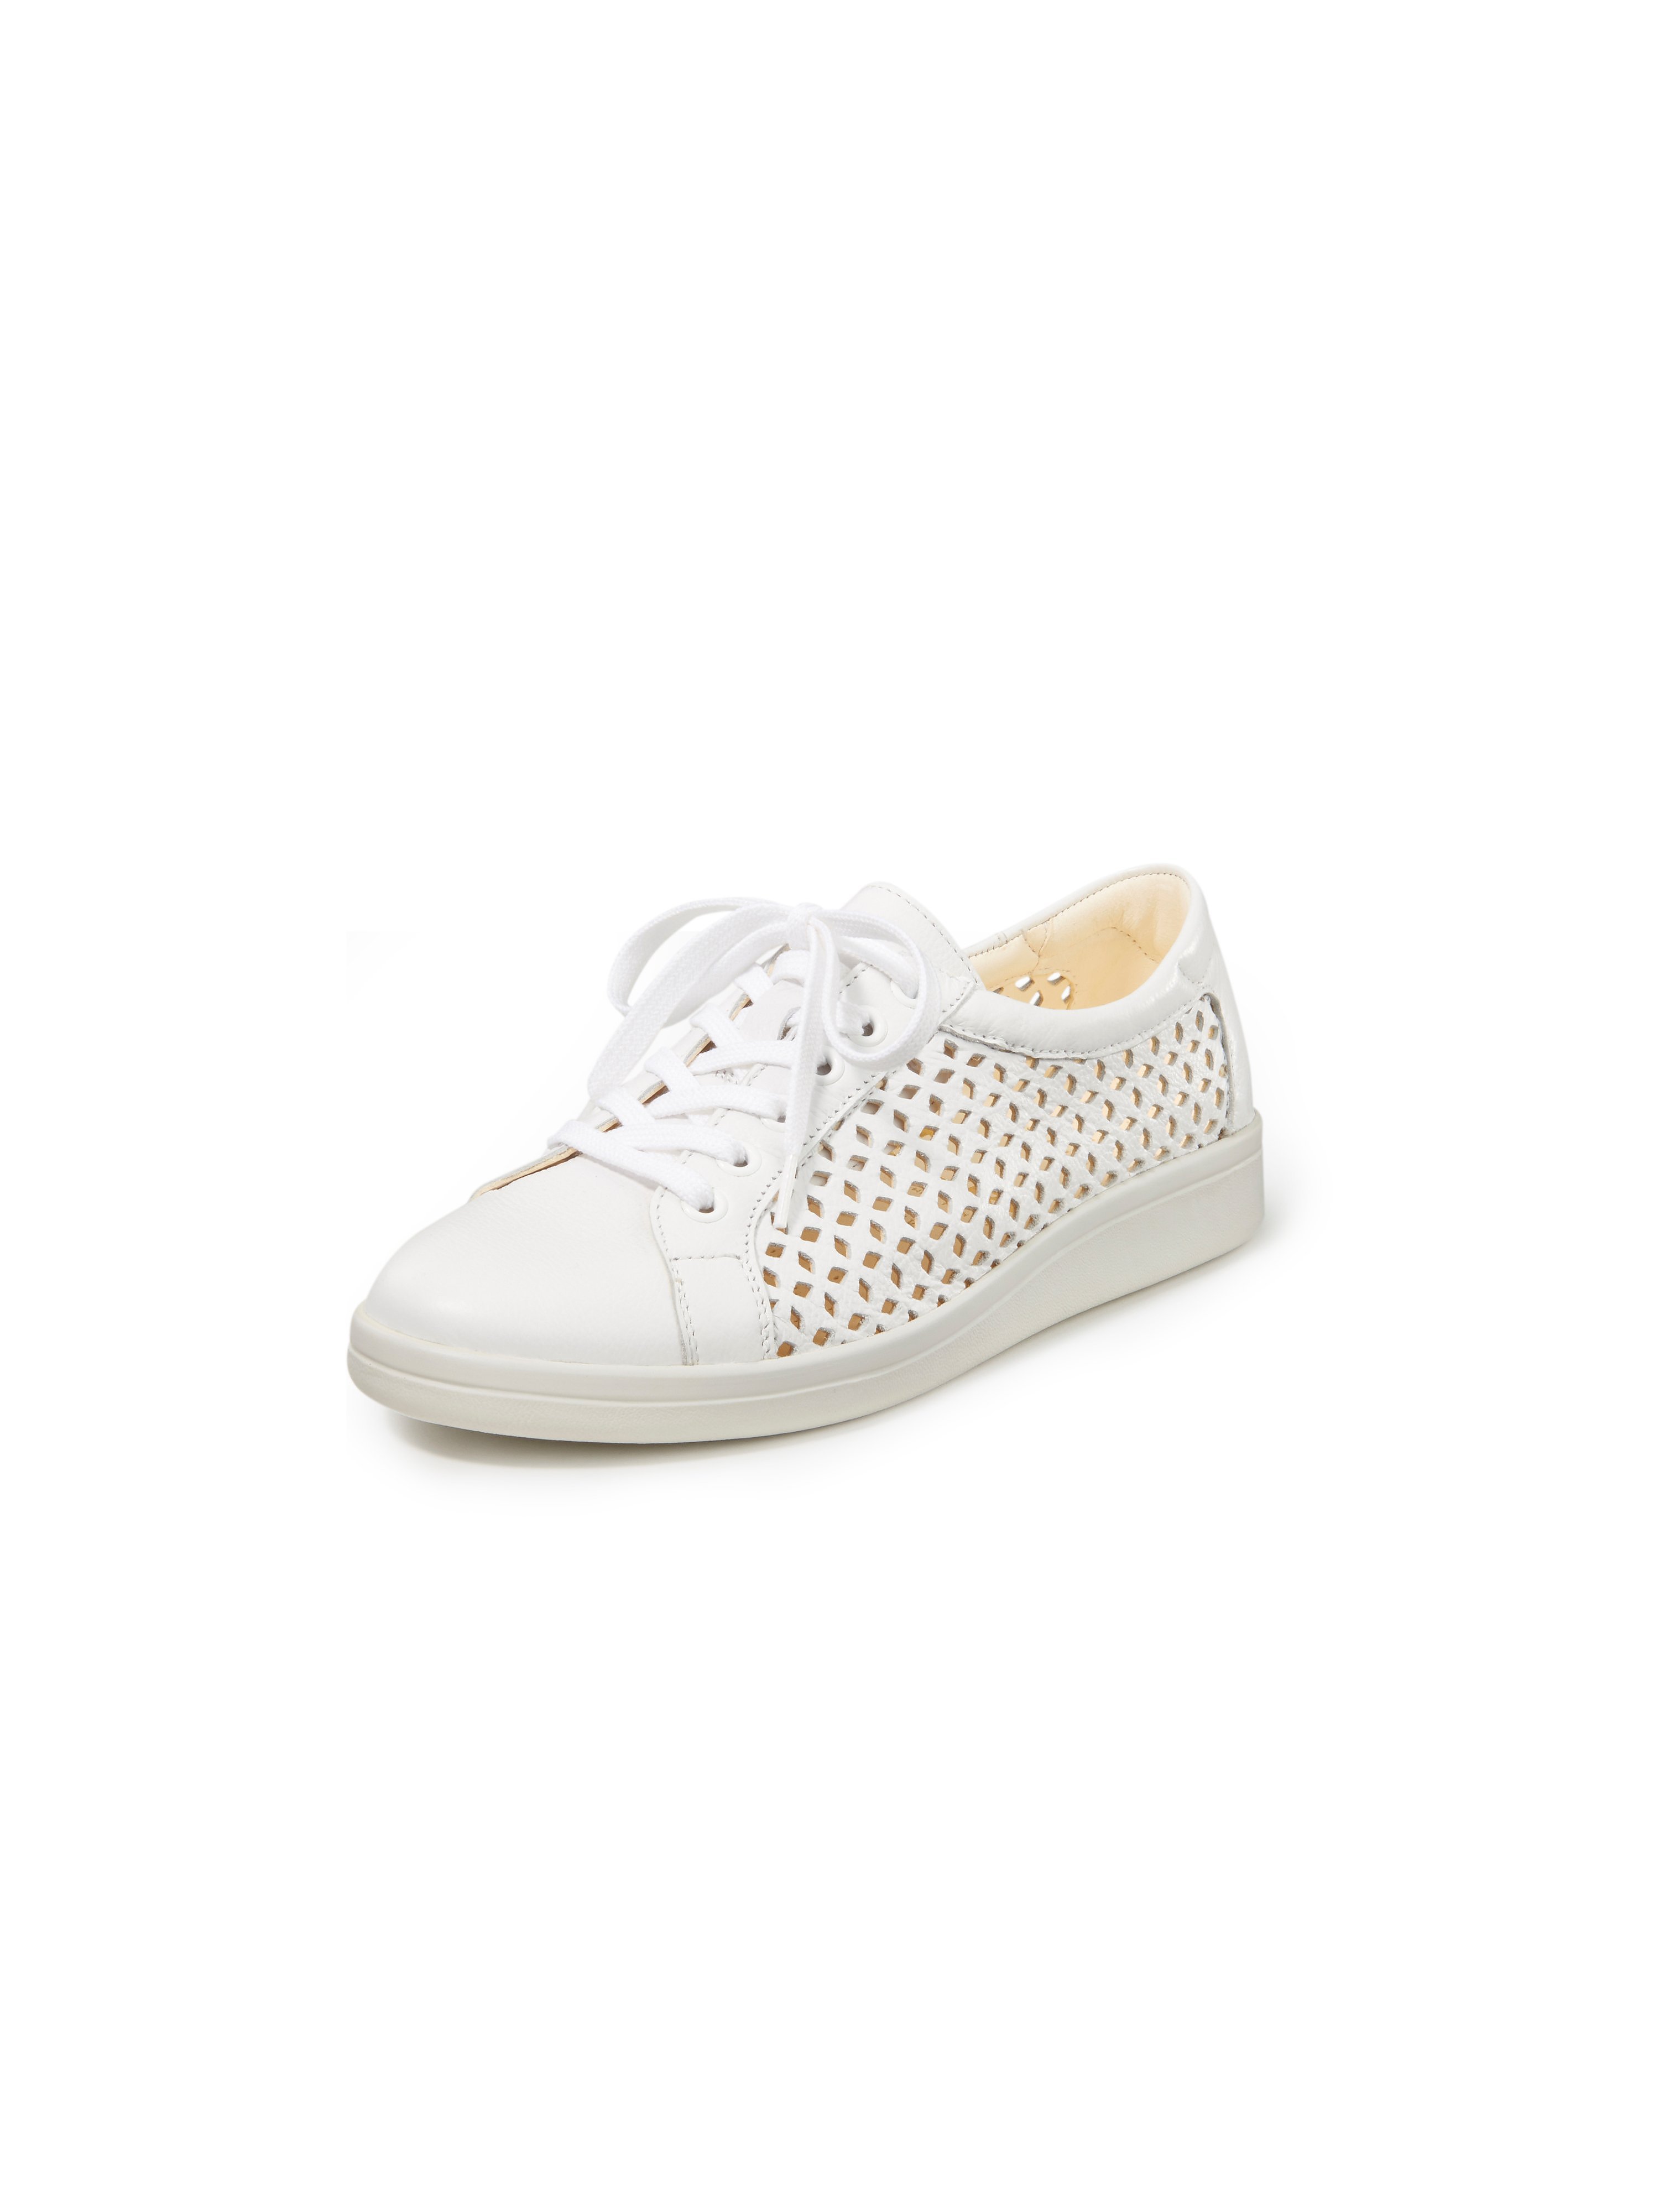 Les sneakers cuir nappa veau  Christian Dietz blanc taille 41